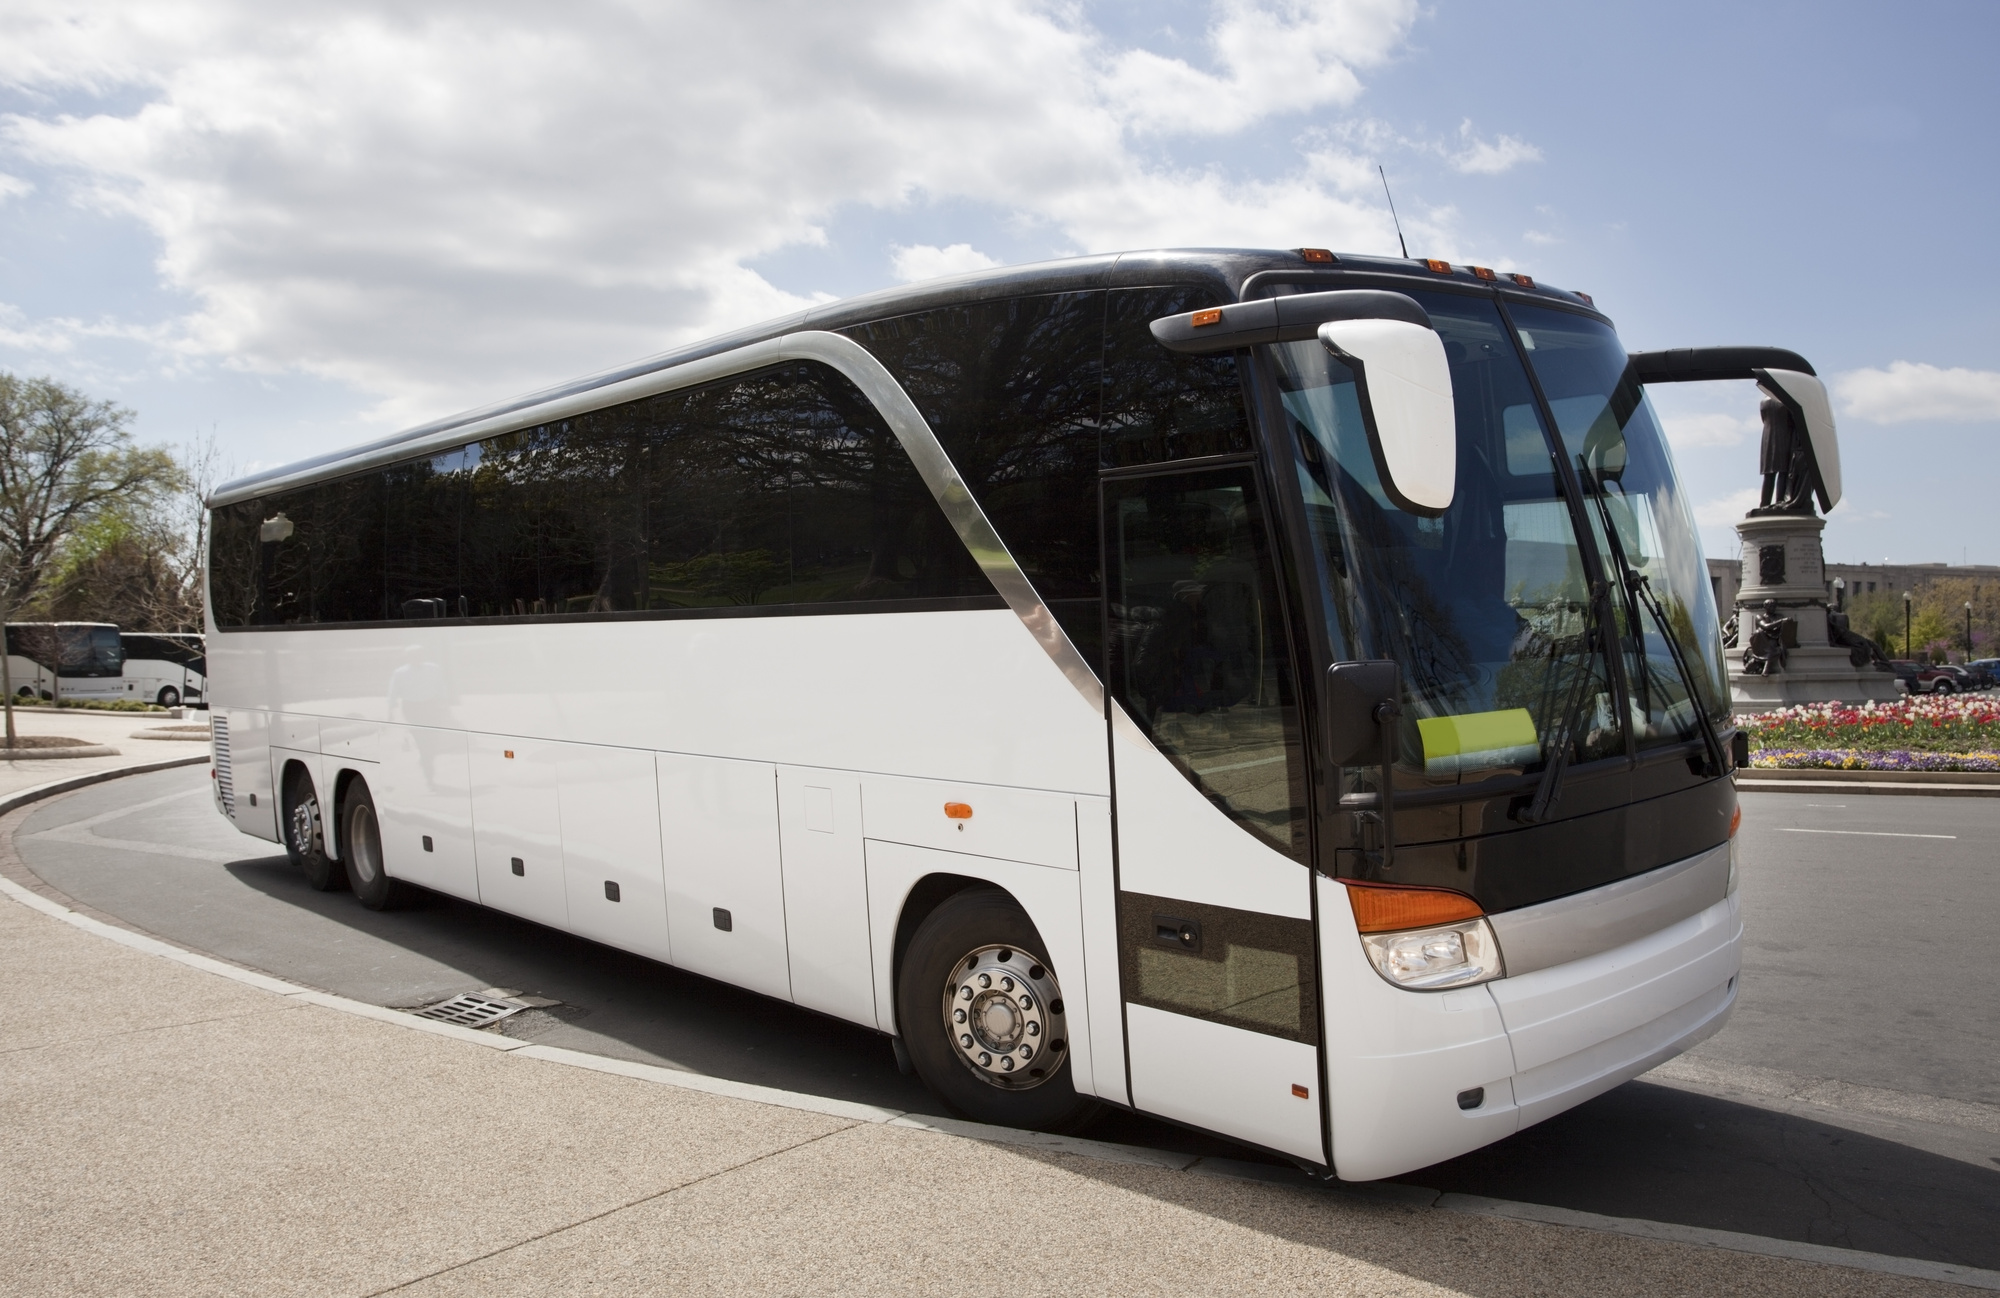 Rent Charter Buses